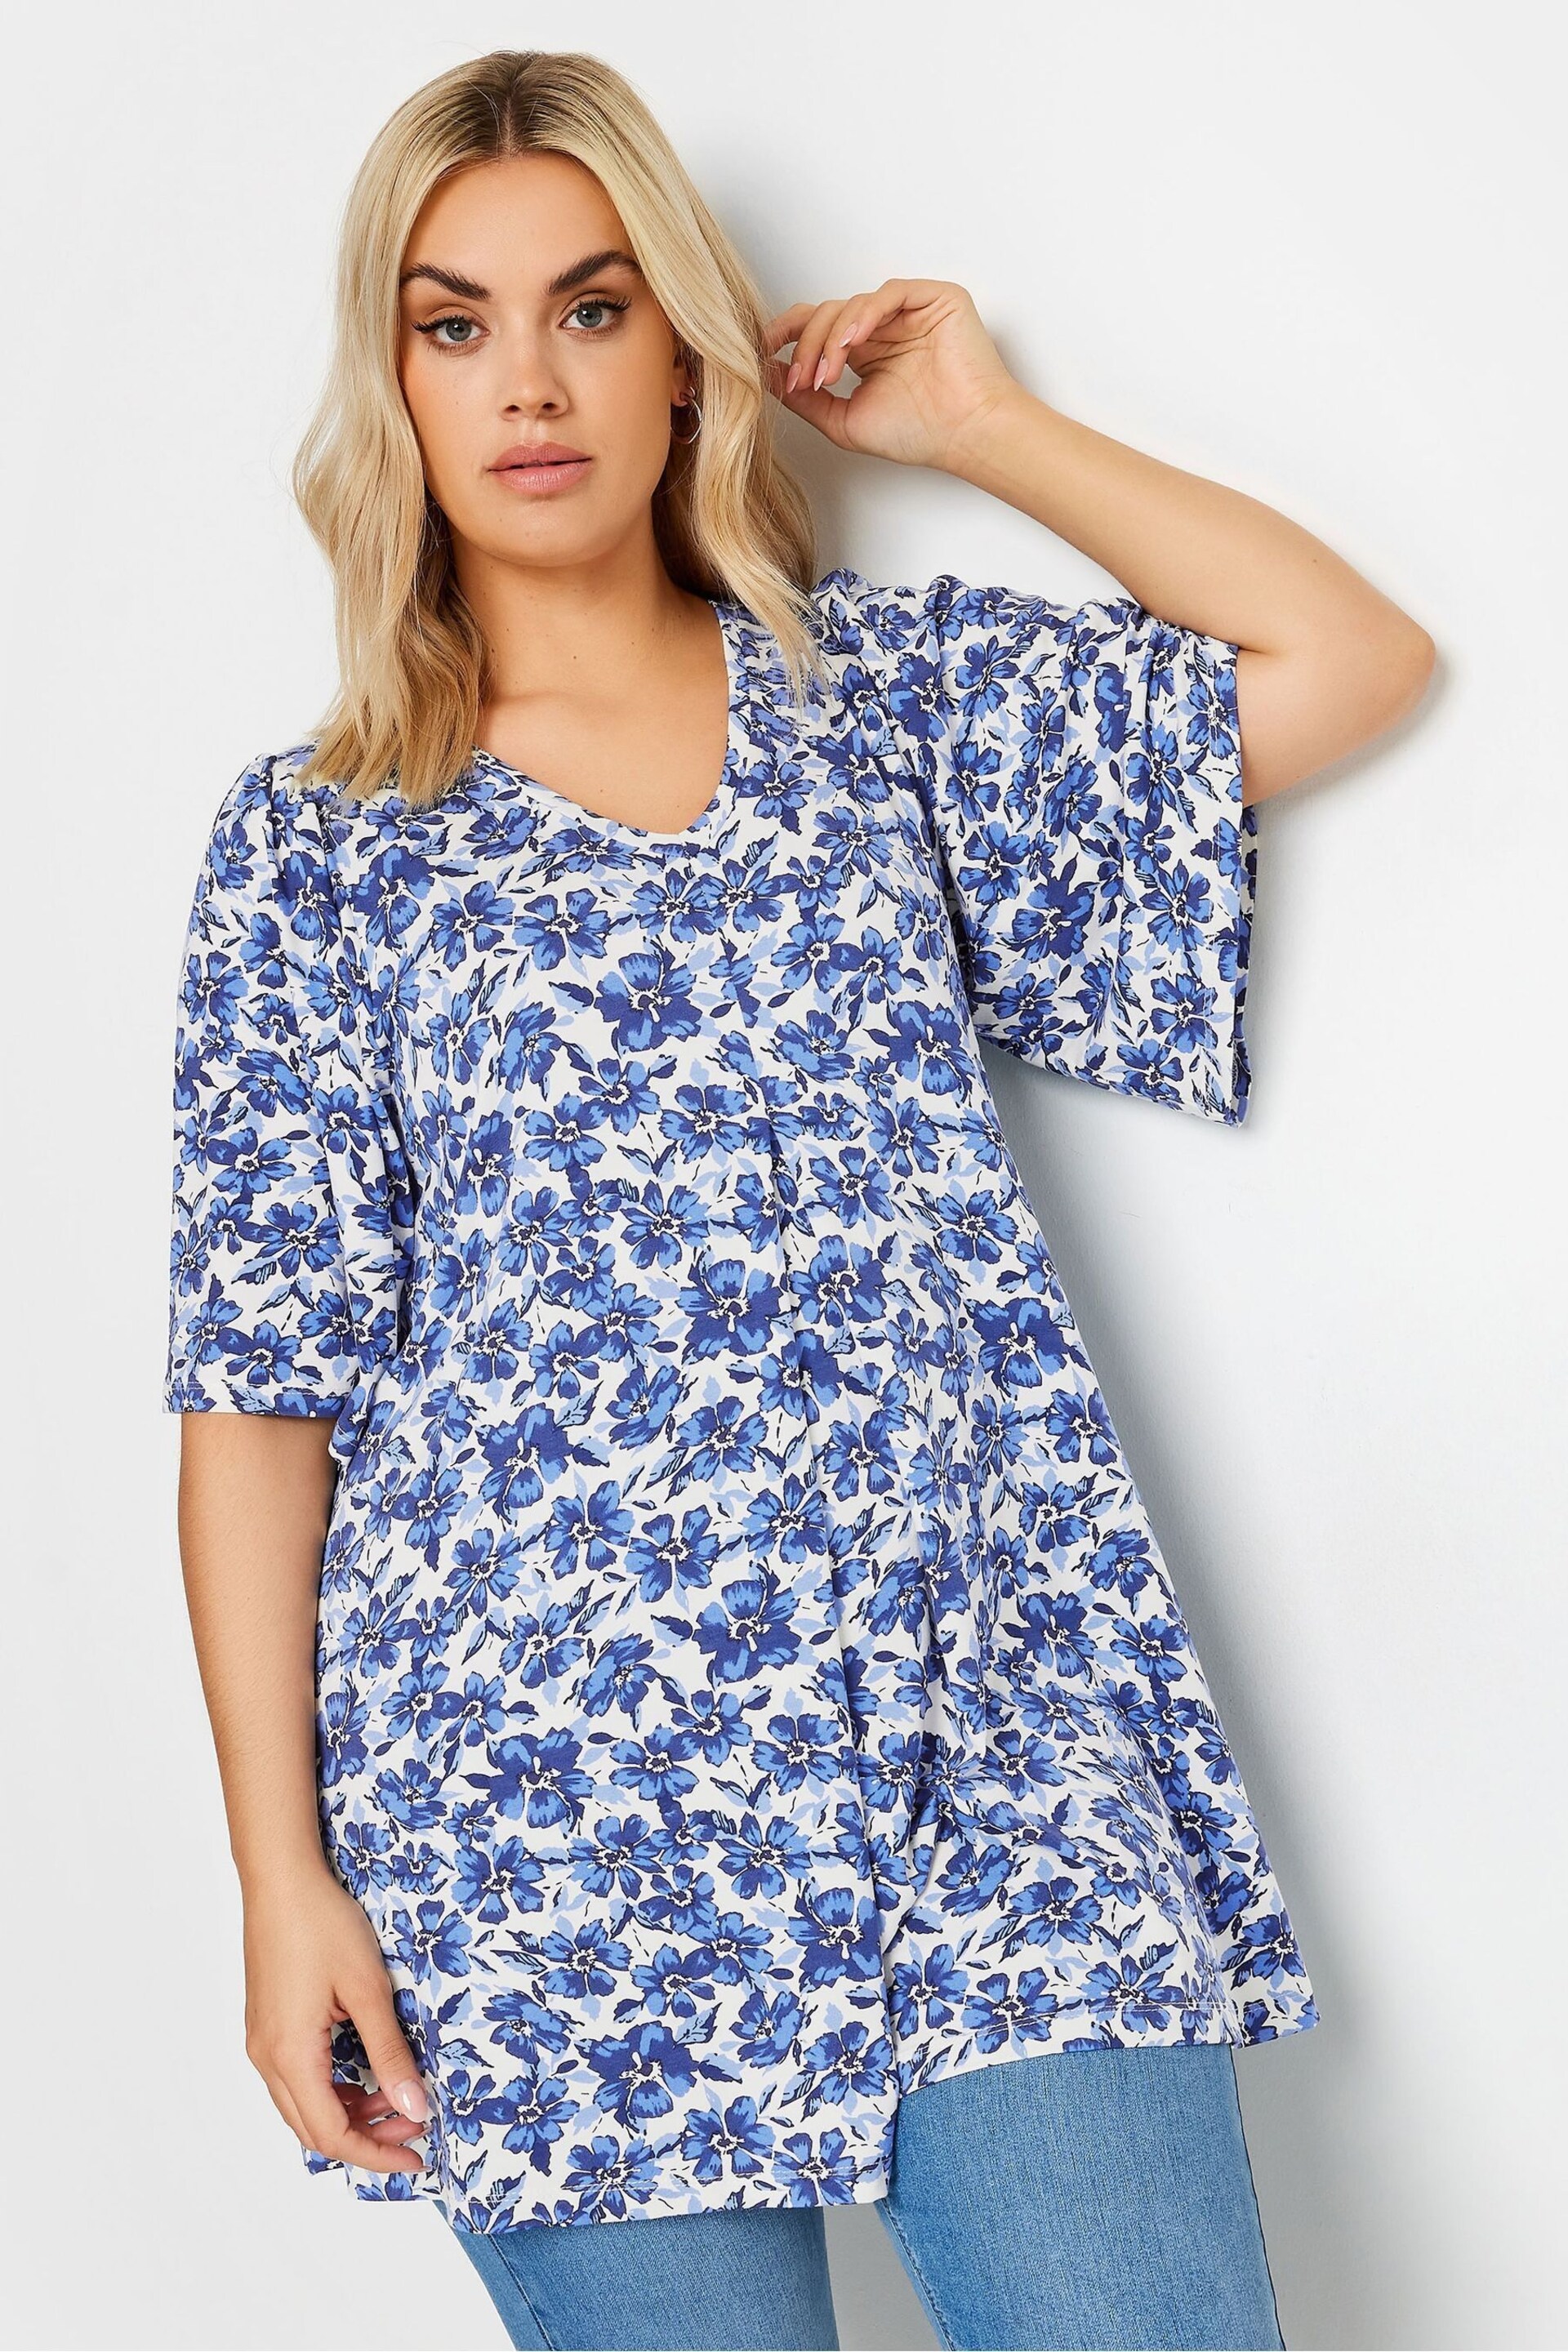 Yours Curve Blue Floral Pleated Swing Top - Image 1 of 5